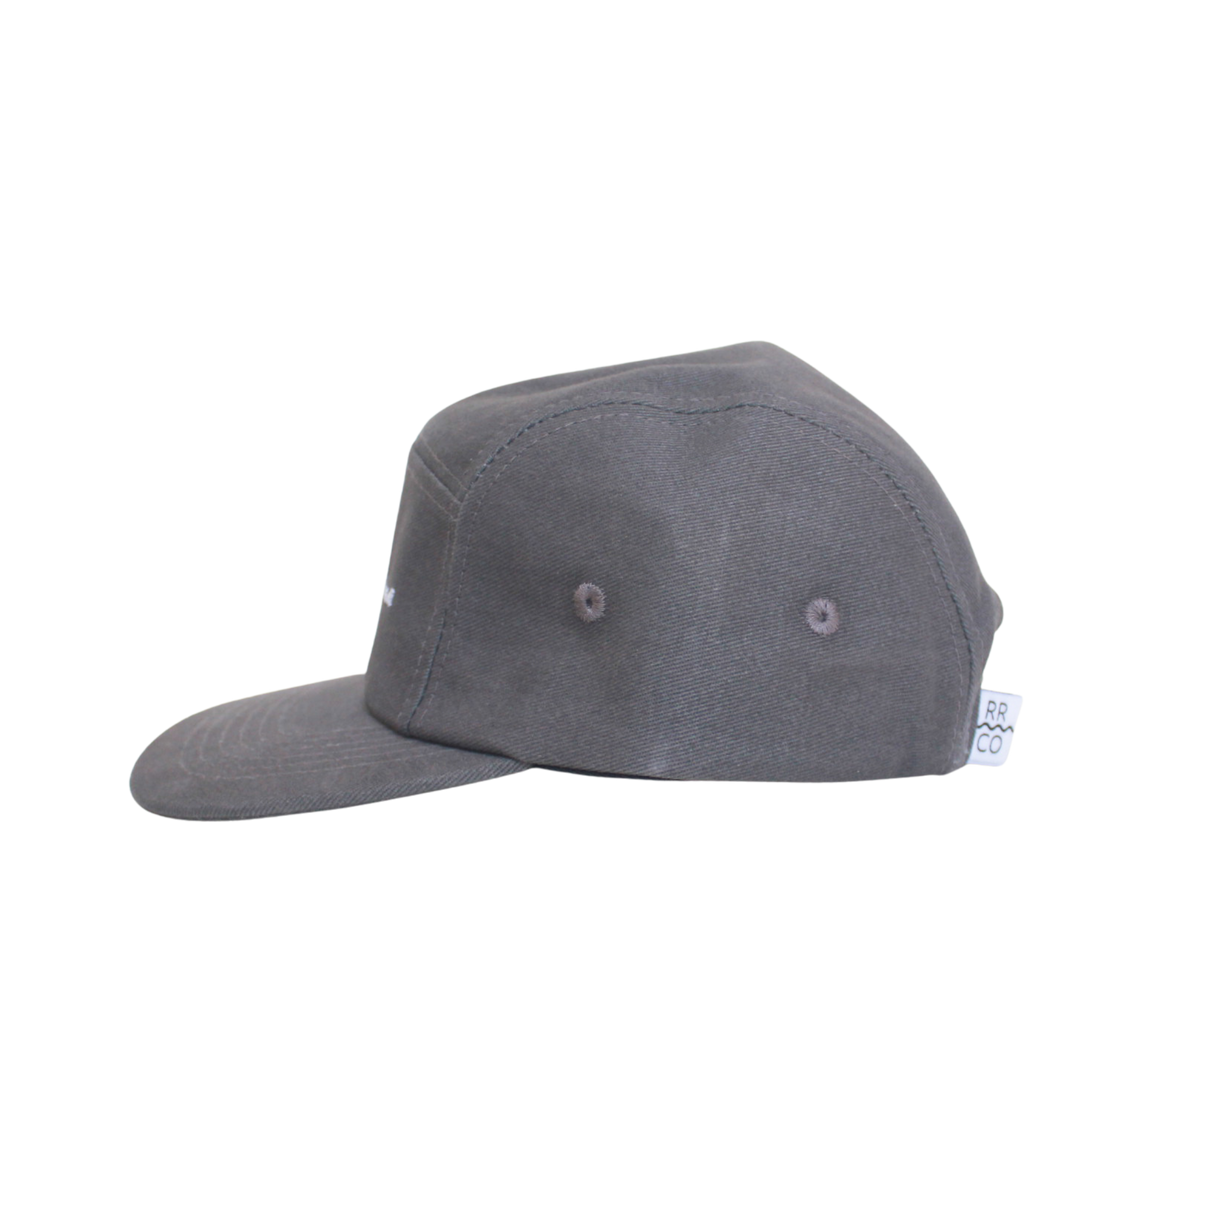 Rad Days Ahead Cotton Five-Panel Hat in Charcoal